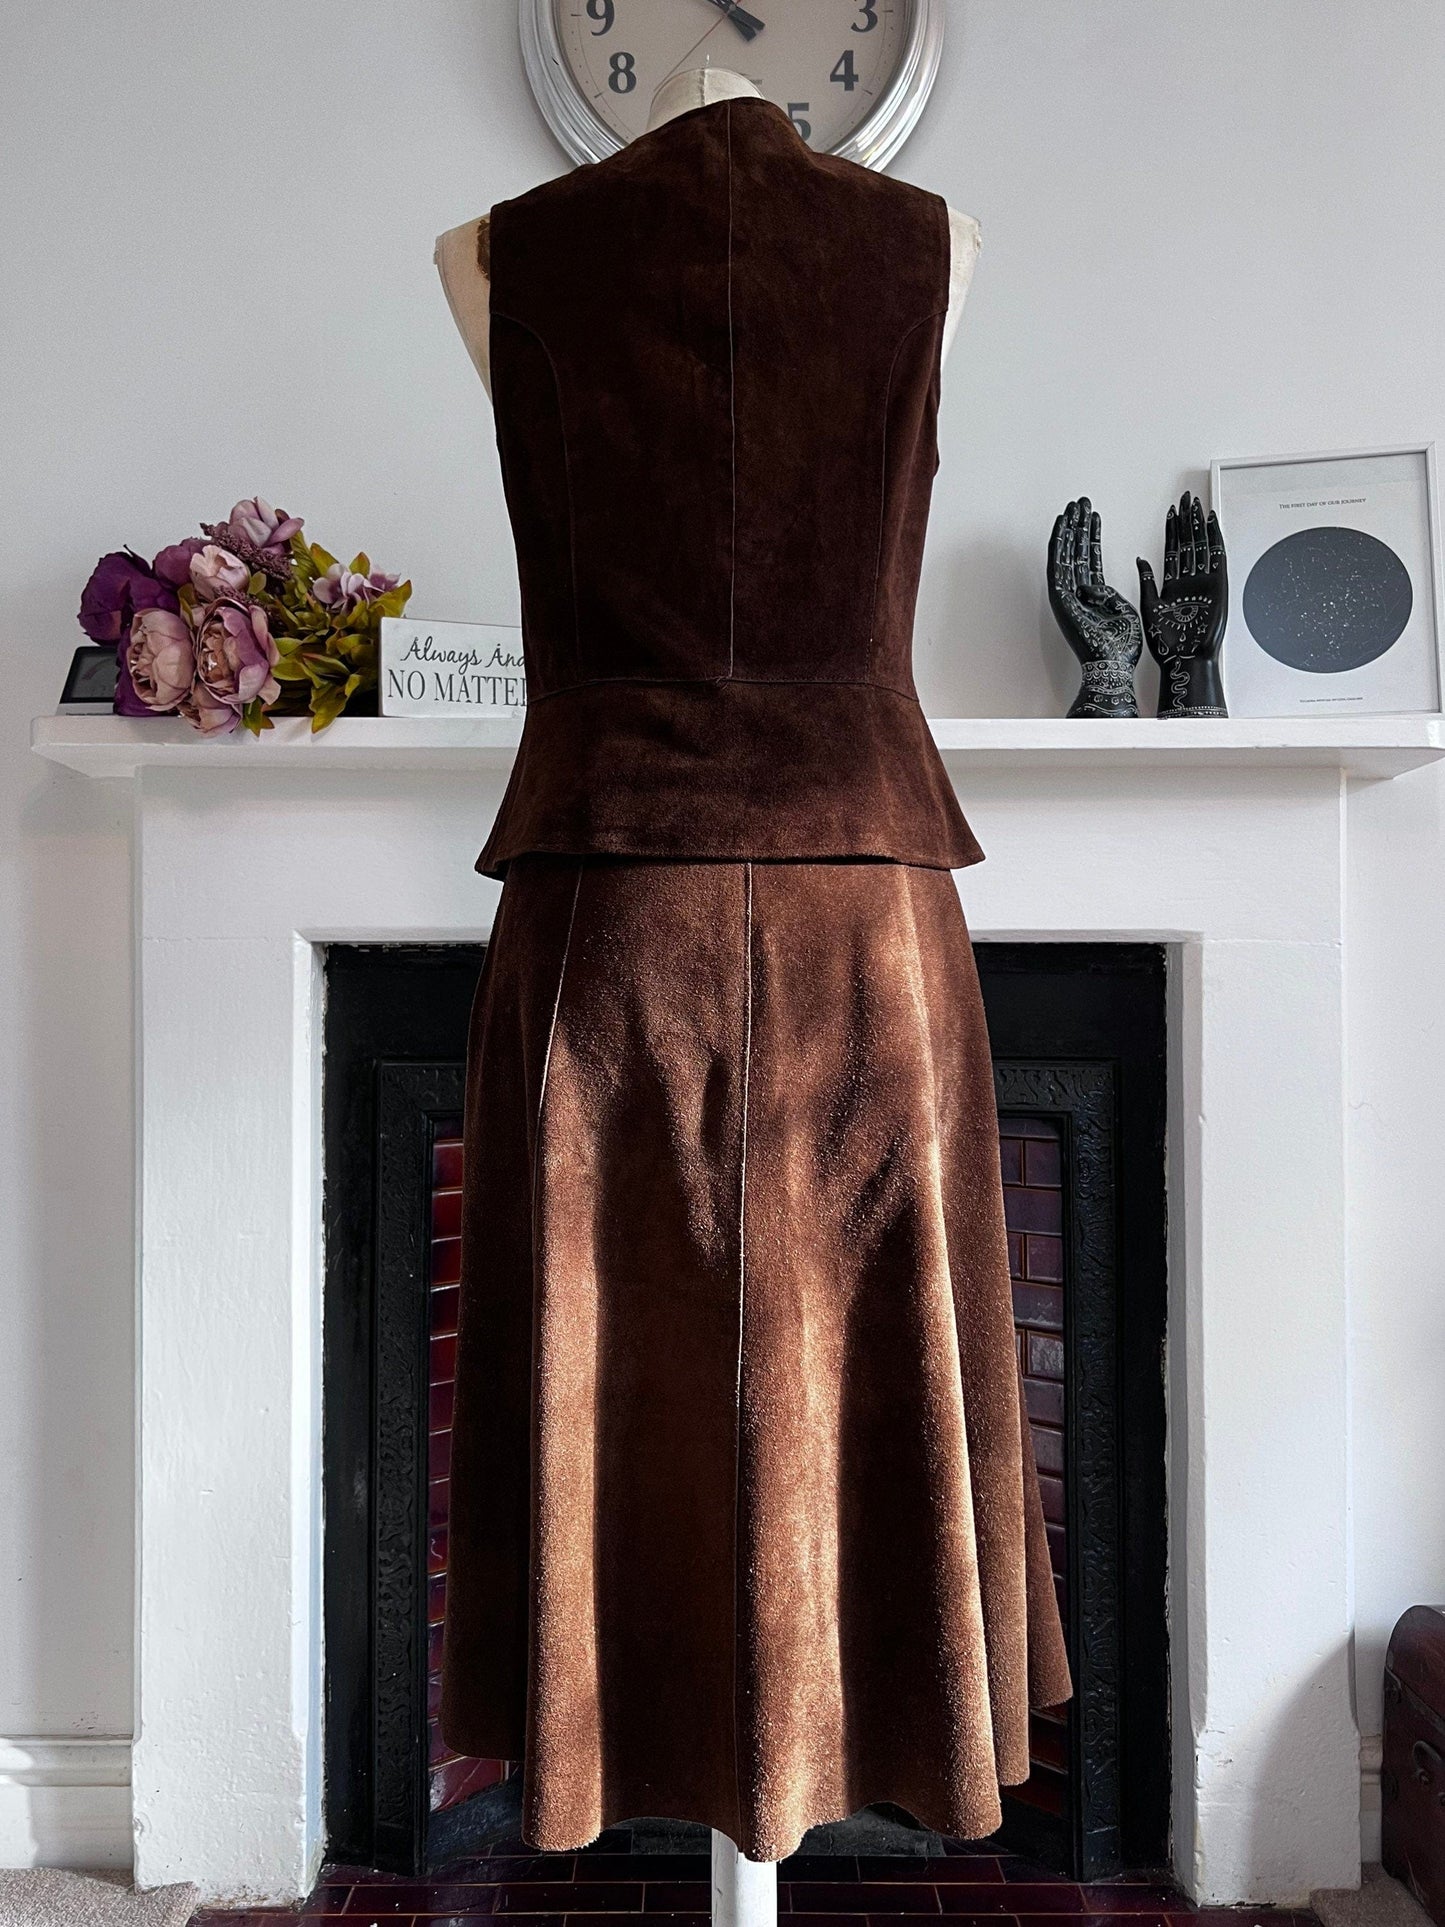 70s Vintage Suede Suit Waistcoat & Skirt Suede Leather Skirt Suede Waistcoat, Vintage Two Piece Set in Brown, 70s Fashion Suede